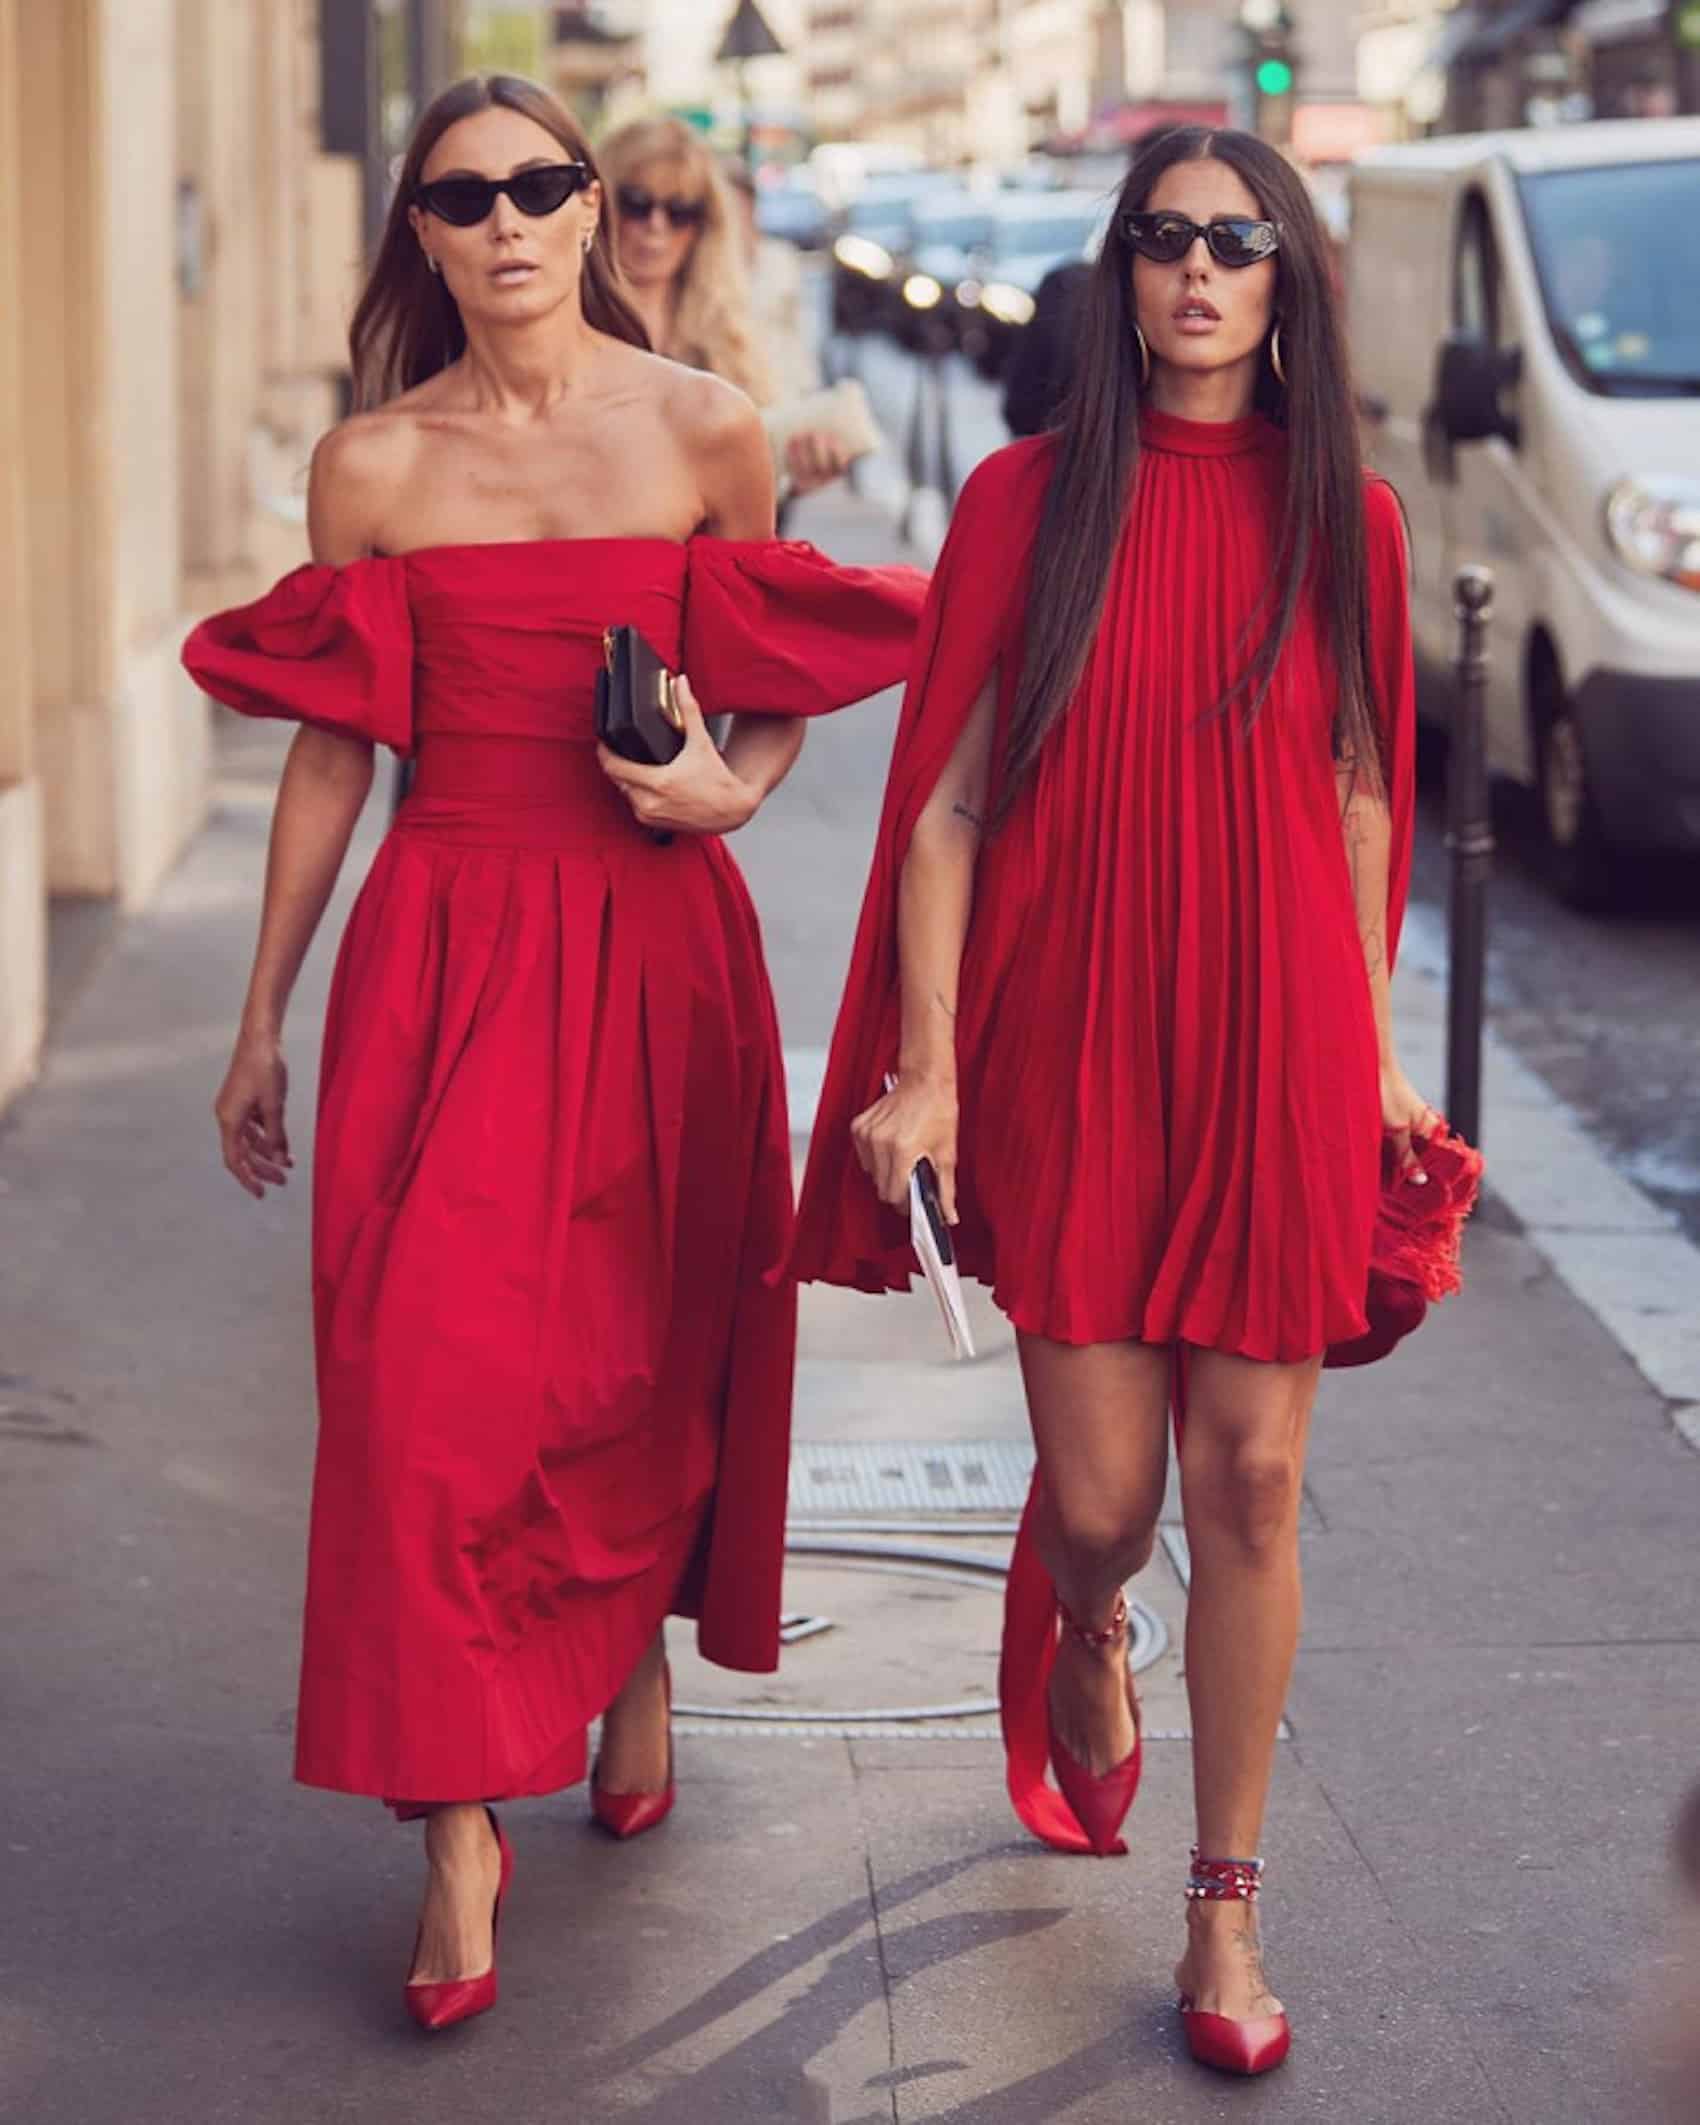 What Colour Shoes To Wear With A Red Dress Chic Outfit Ideas ...